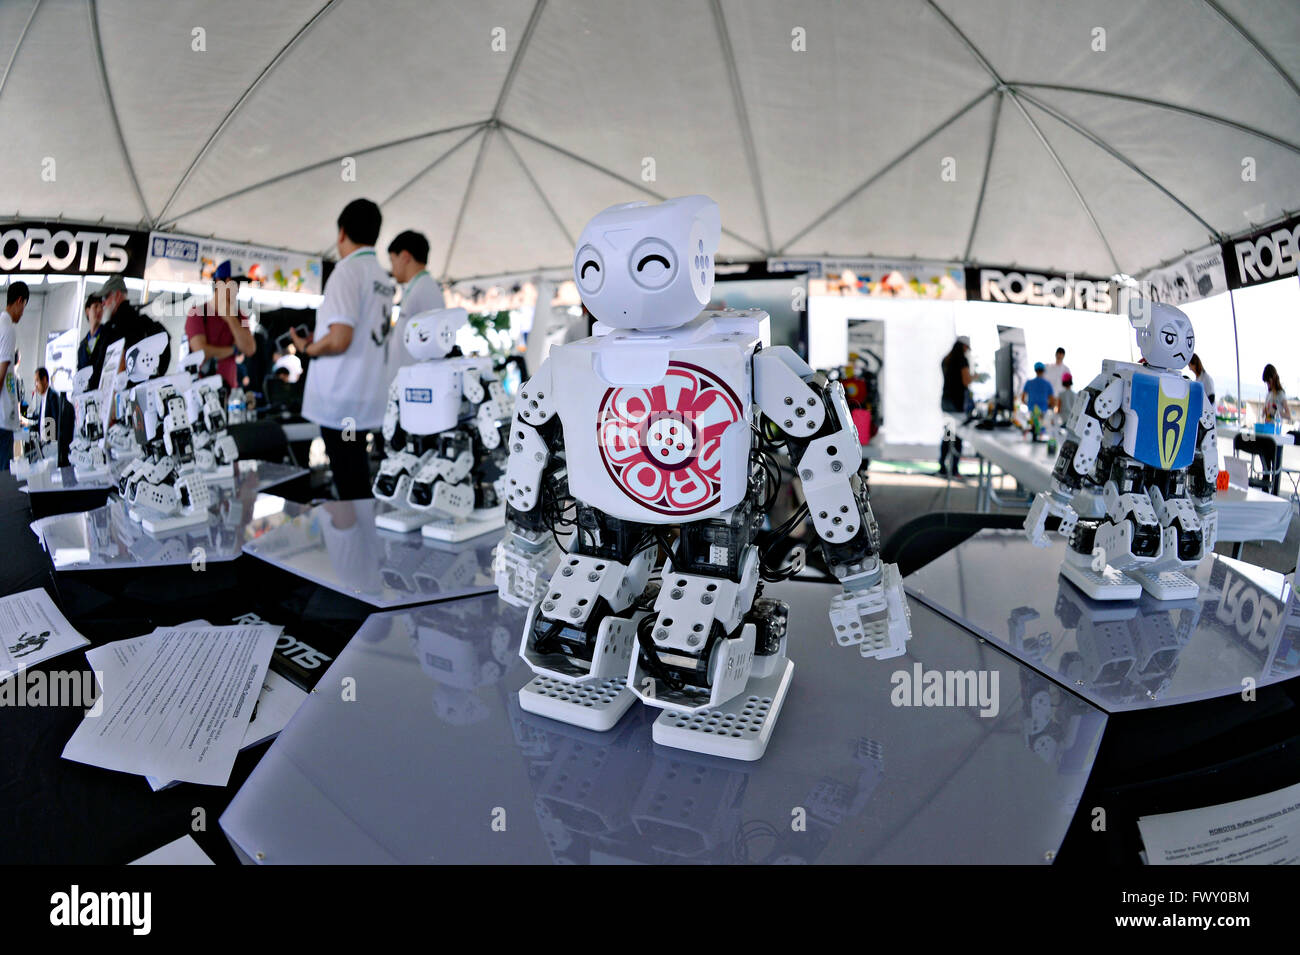 Toy robots on display at the Expo event during the DARPA Rescue Robot Showdown at  Fairplex Fairground June 5, 2015 in Pomona, California. The DARPA event is to challenge teams to design robots that will conduct humanitarian, disaster relief and related operations. Stock Photo